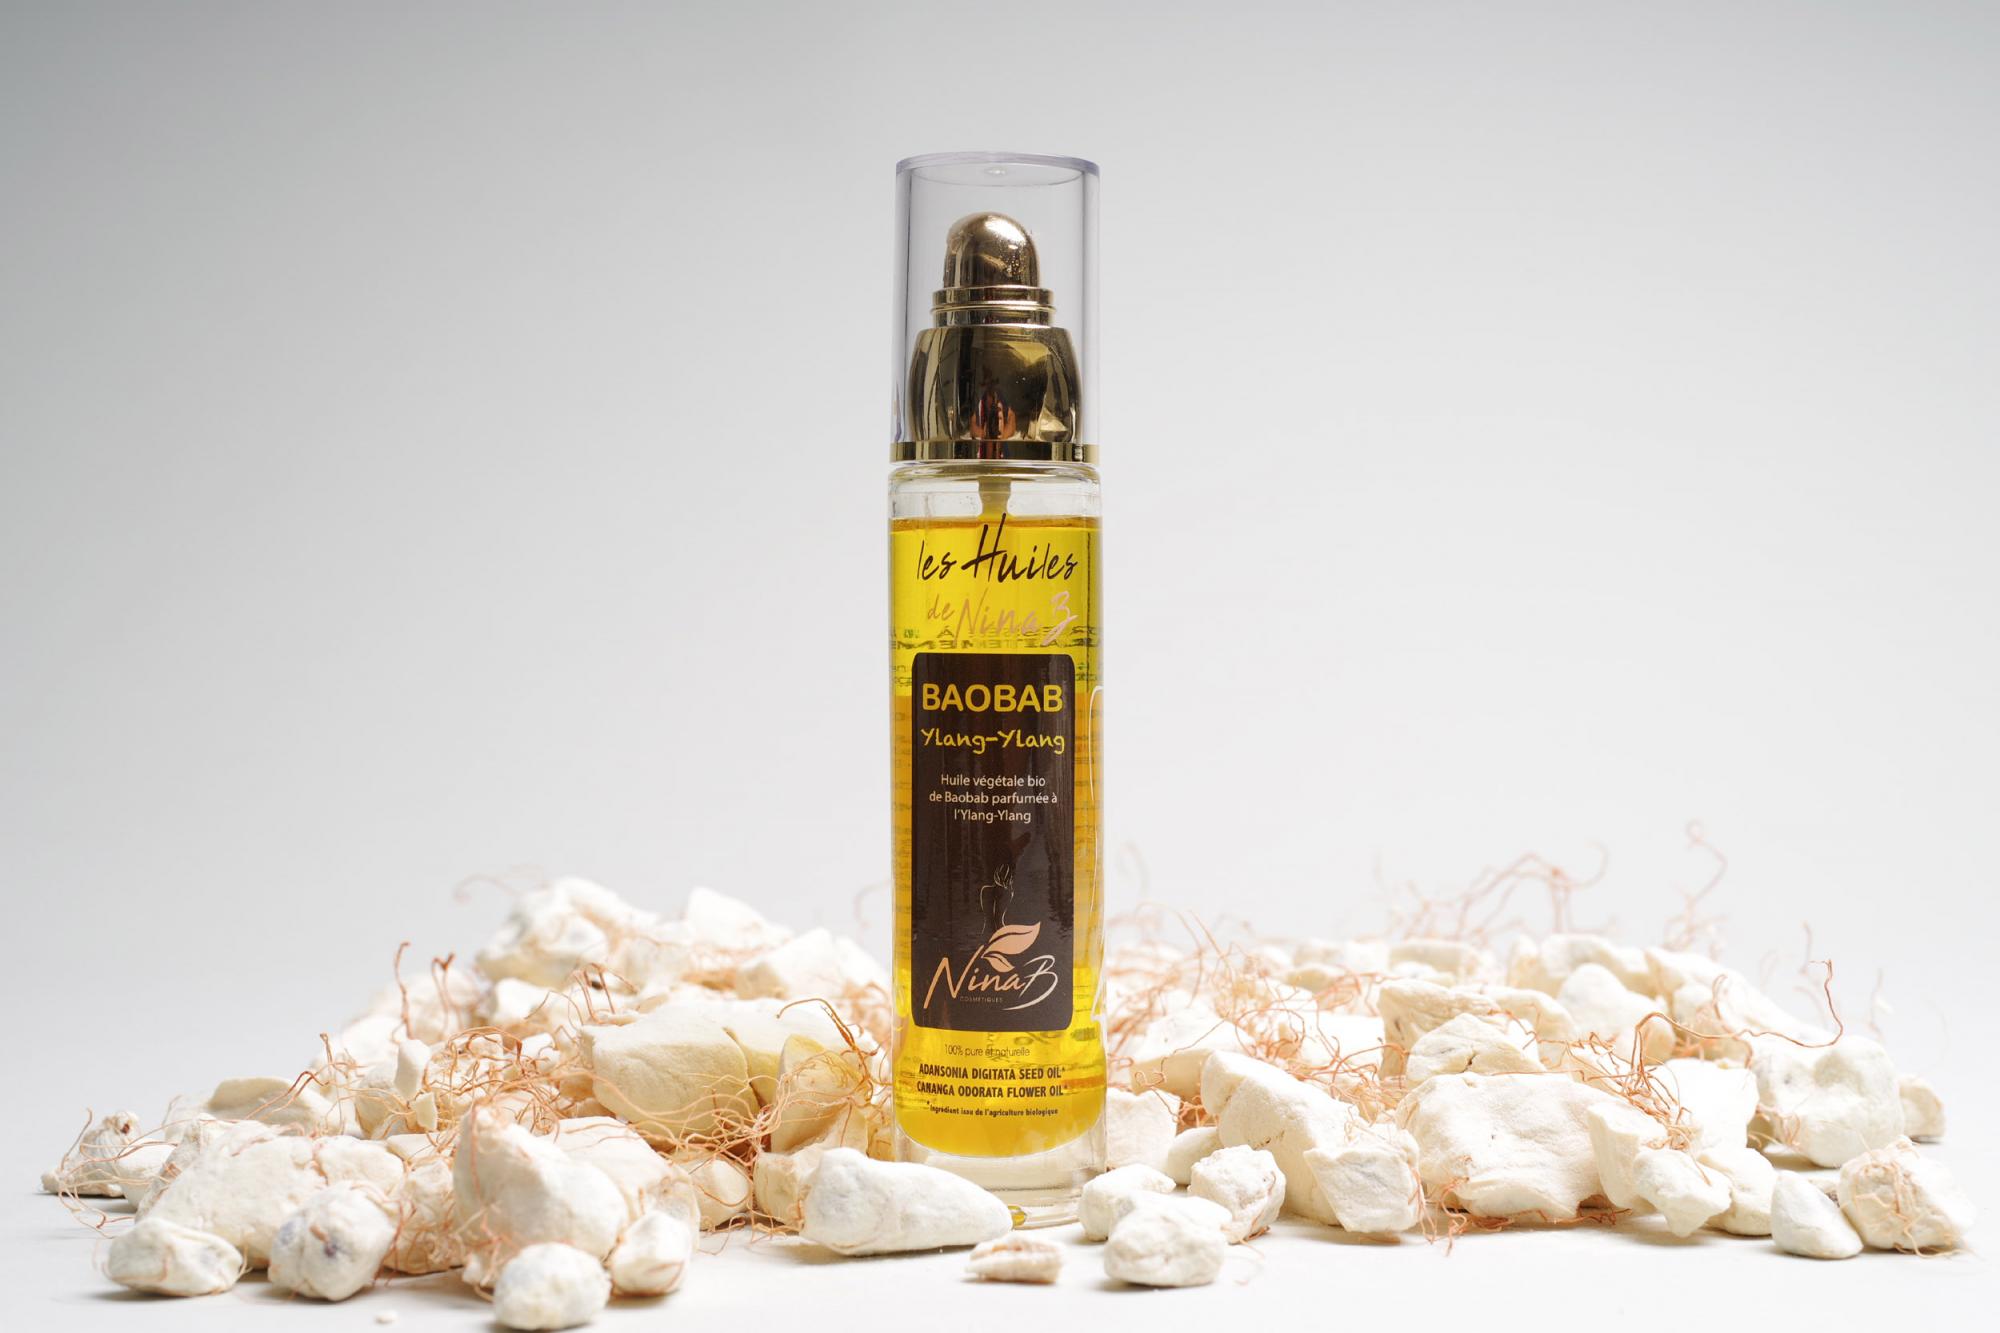 Baobab oil with organic Ylang-Ylang extracts - Natural, organic cosmetic product, certified ECOCERT COSMOS ORGANIC